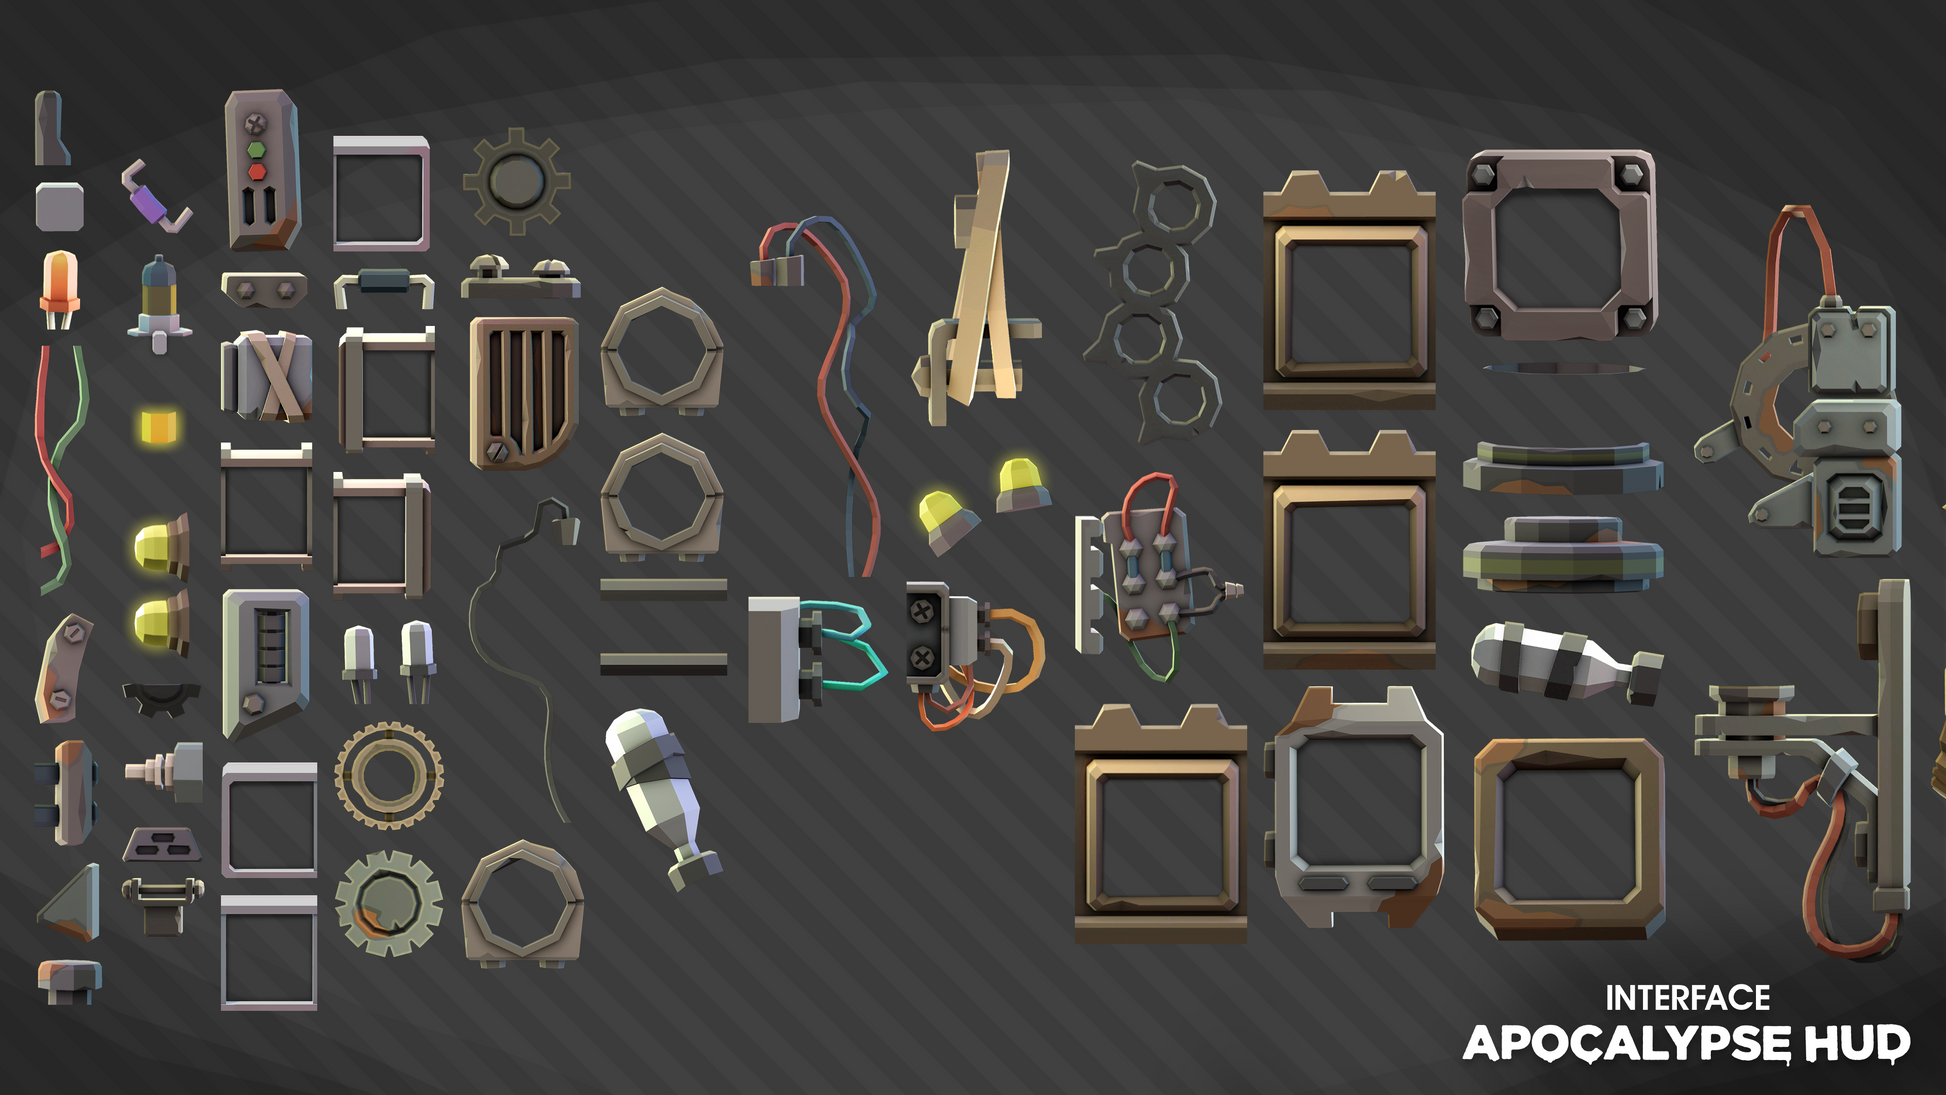 INTERFACE Apocalypse HUD UI asset pack displaying frame character equipment sprites for game design